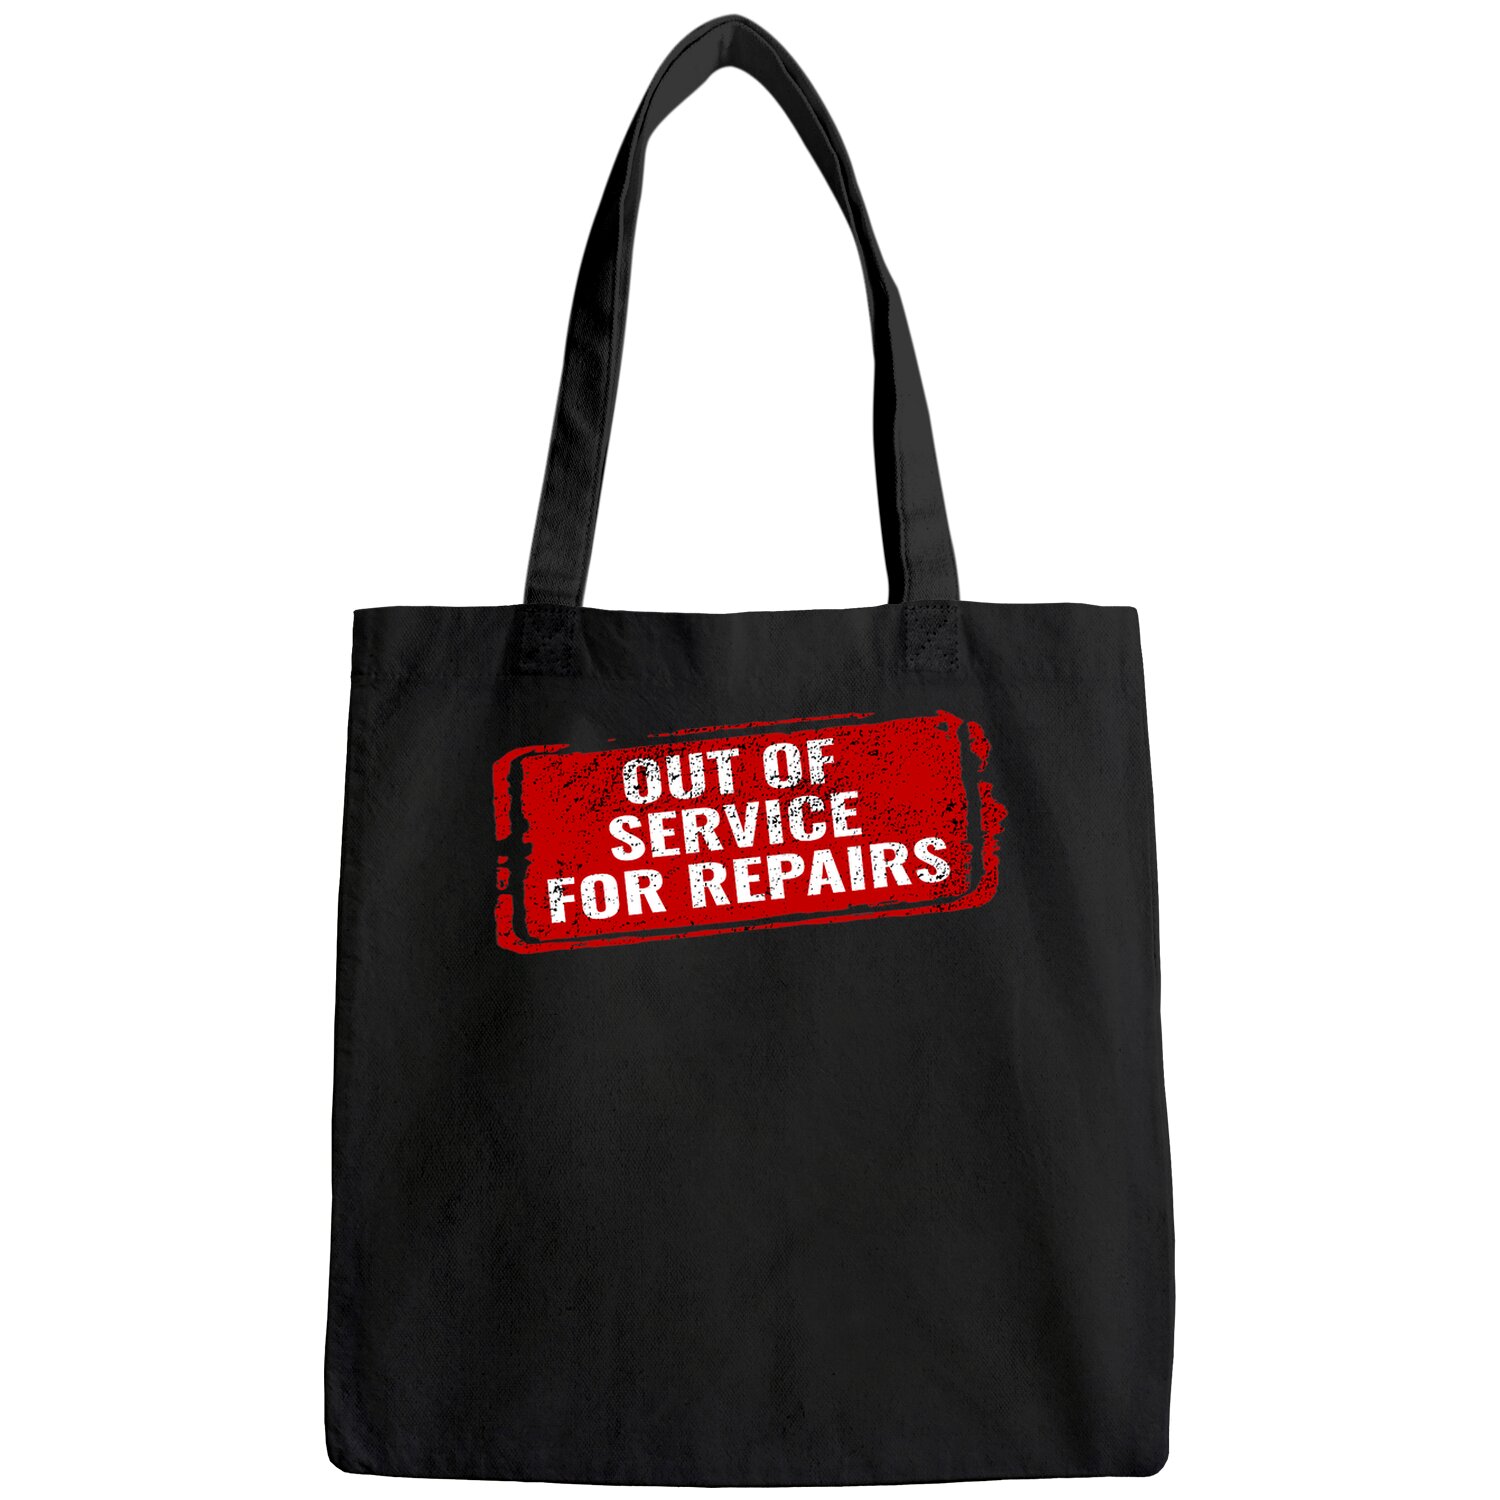 Funny Knee Hip Shoulder Joint Replacement Surgery Gift Tote Bag